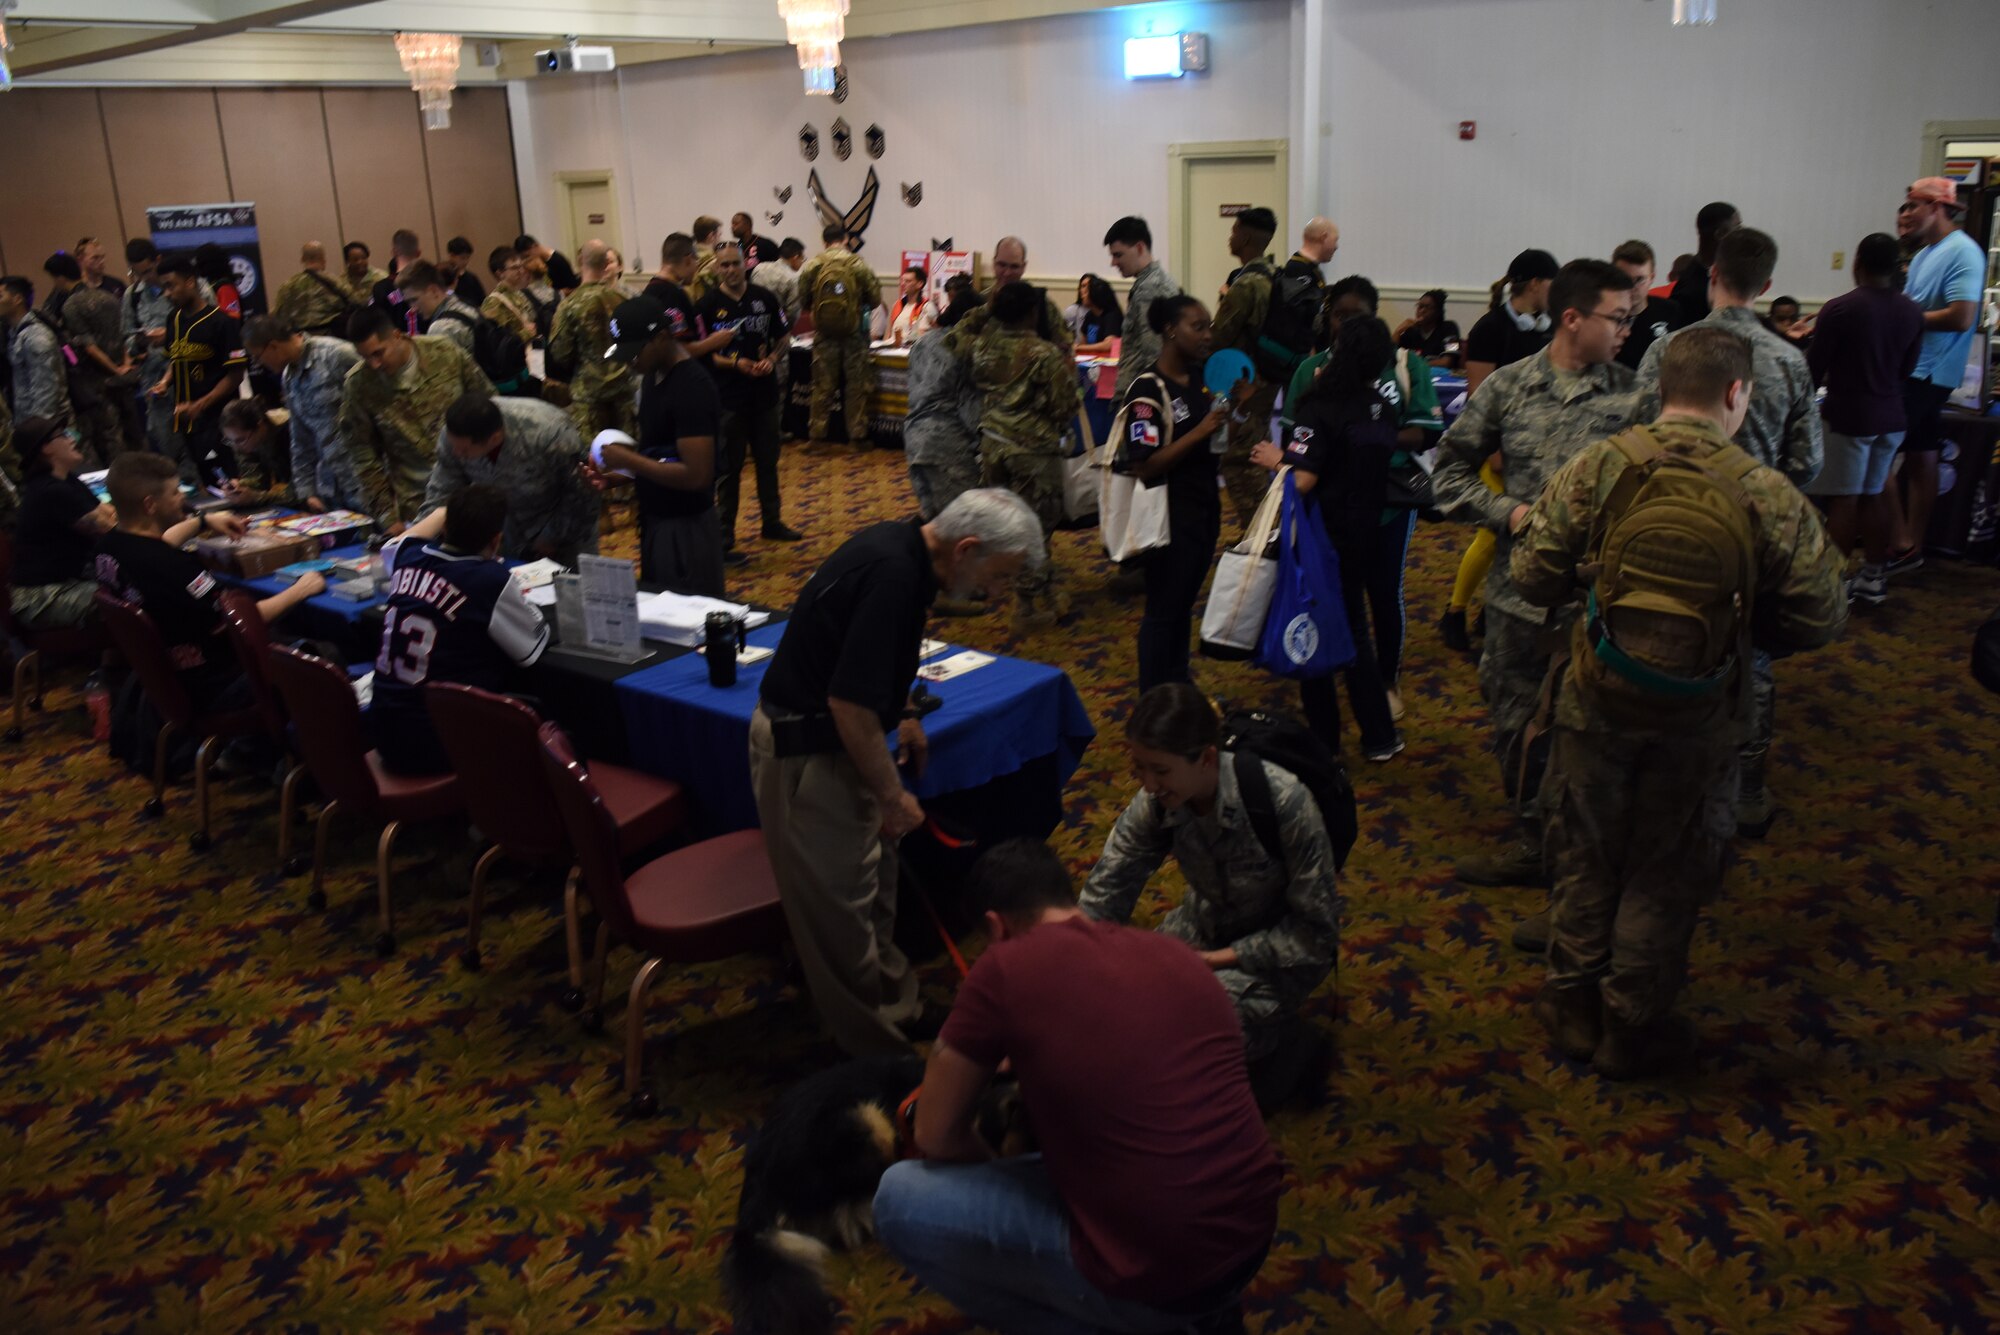 U.S. Air Force and Republic of Korea Air Force members check out different organizations at the Airmen 4 Airmen Club Fair during the Resilience Tactical Pause capstone event at Kunsan Air Base, Republic of Korea, Sept. 13, 2019. The event featured clubs for individuals looking to volunteer, develop professionally and join social organizations. (U.S. Air Force photo by Staff Sgt. Joshua Edwards)